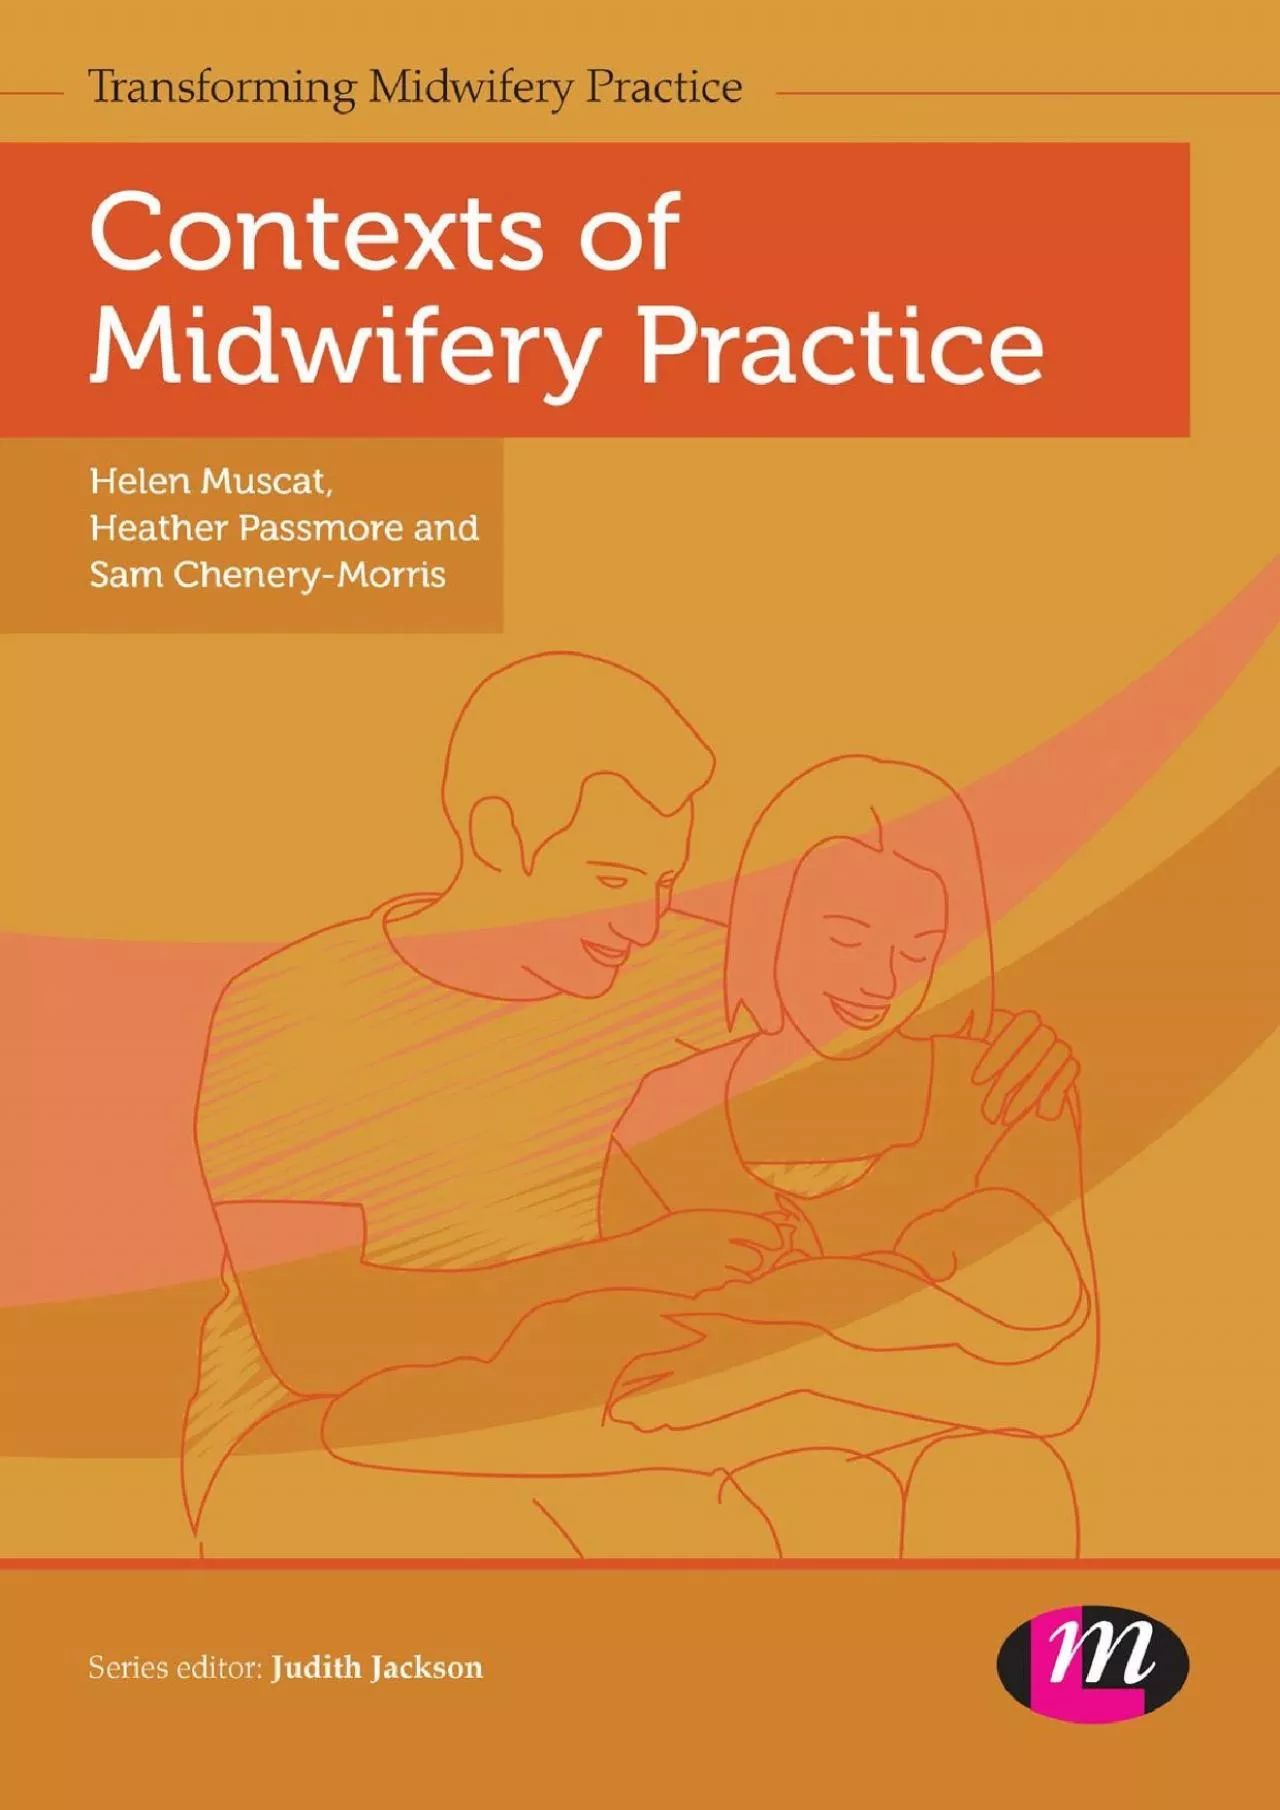 (BOOK)-Contexts of Midwifery Practice (Transforming Midwifery Practice Series)